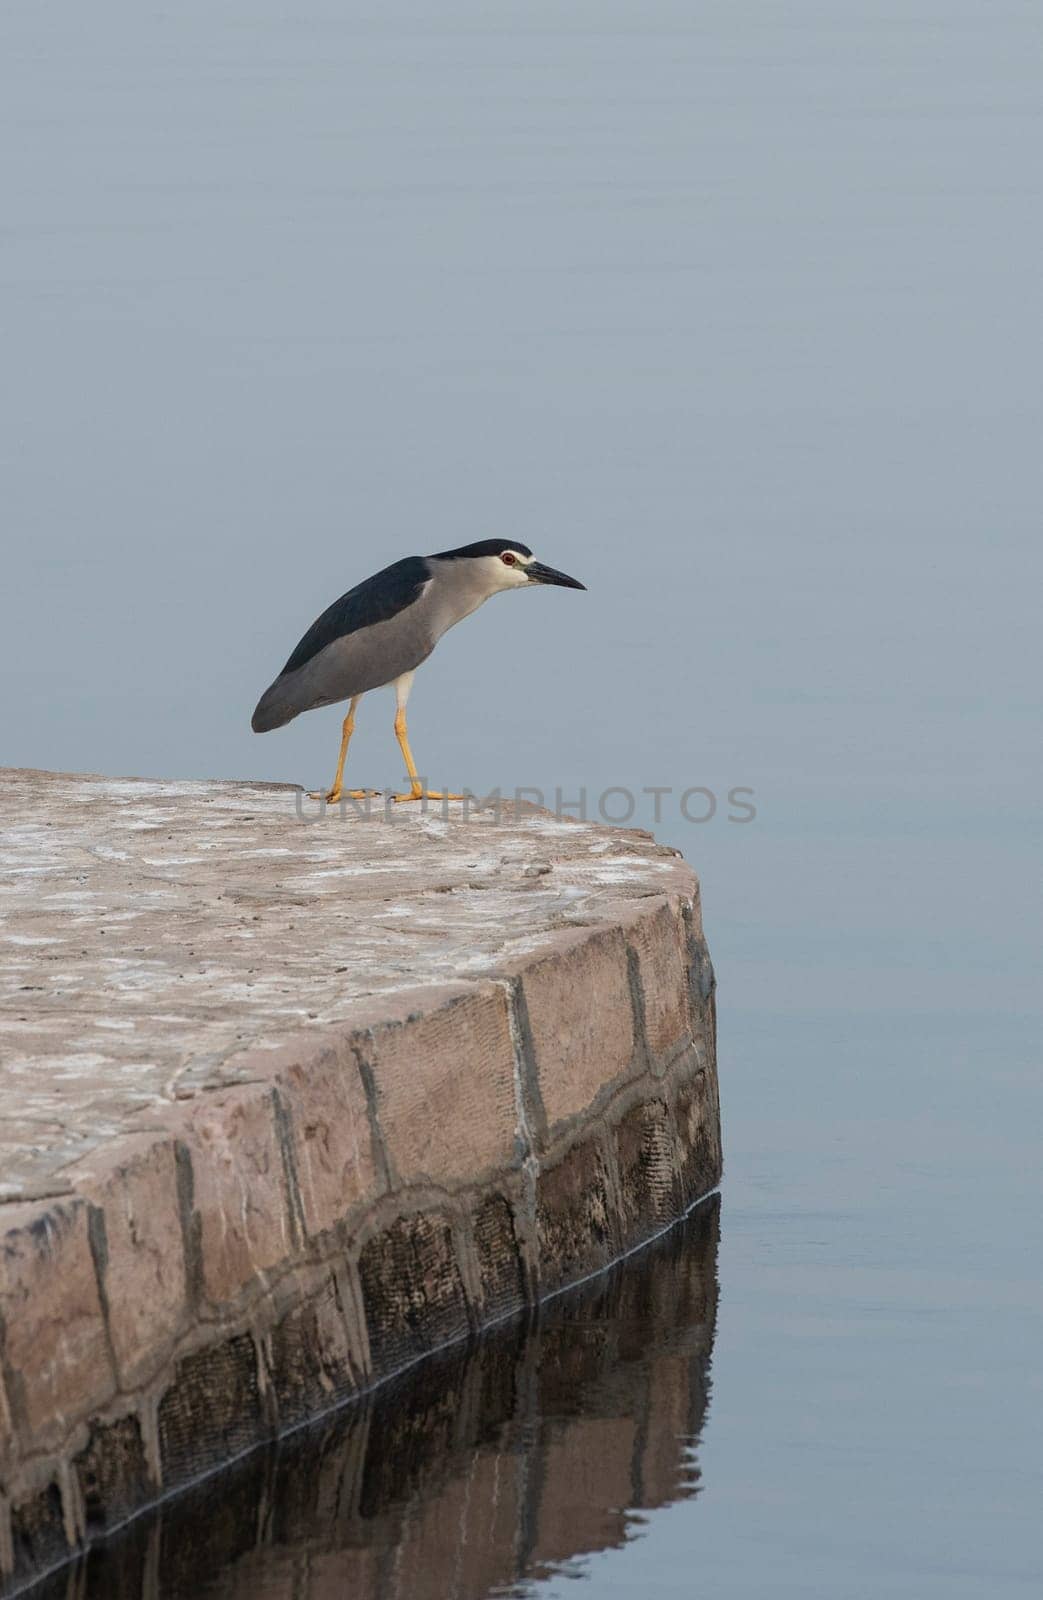 Black-crowned night heron nycticorax nycticorax stood on edge of stone wall next to river